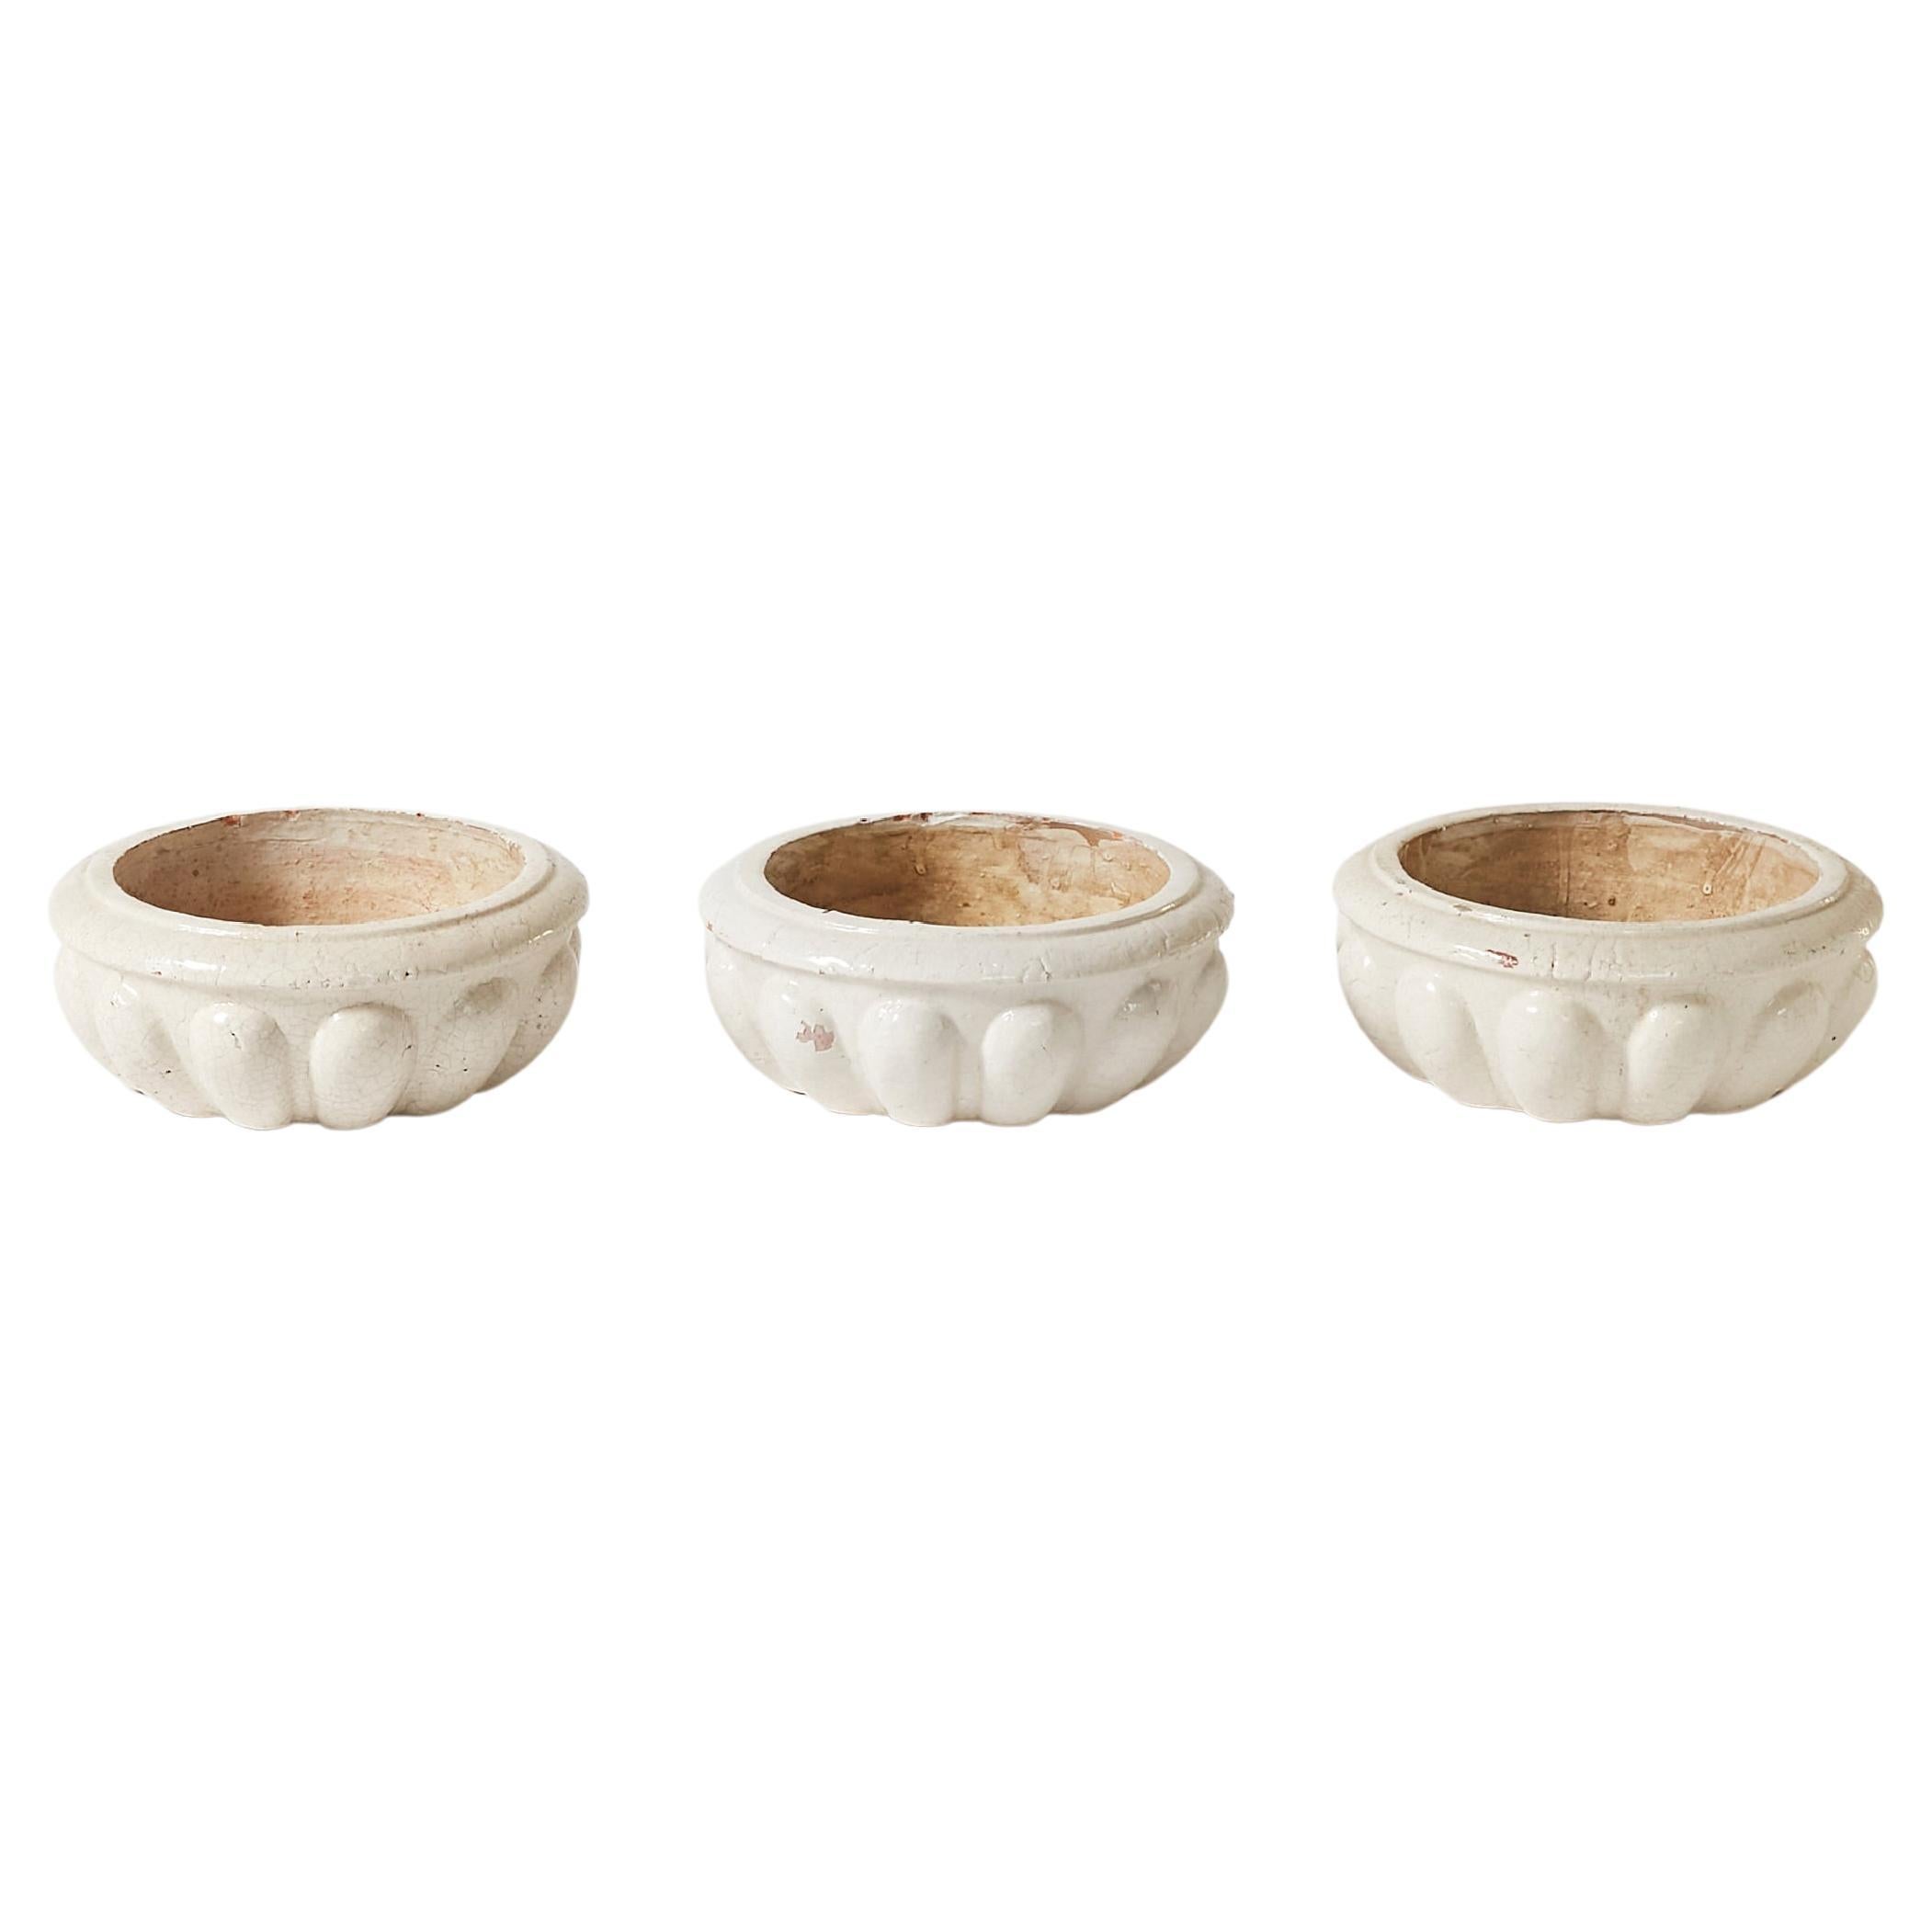 Set of Three Dutch Terracota Planters Finished in White Crackled Glaze